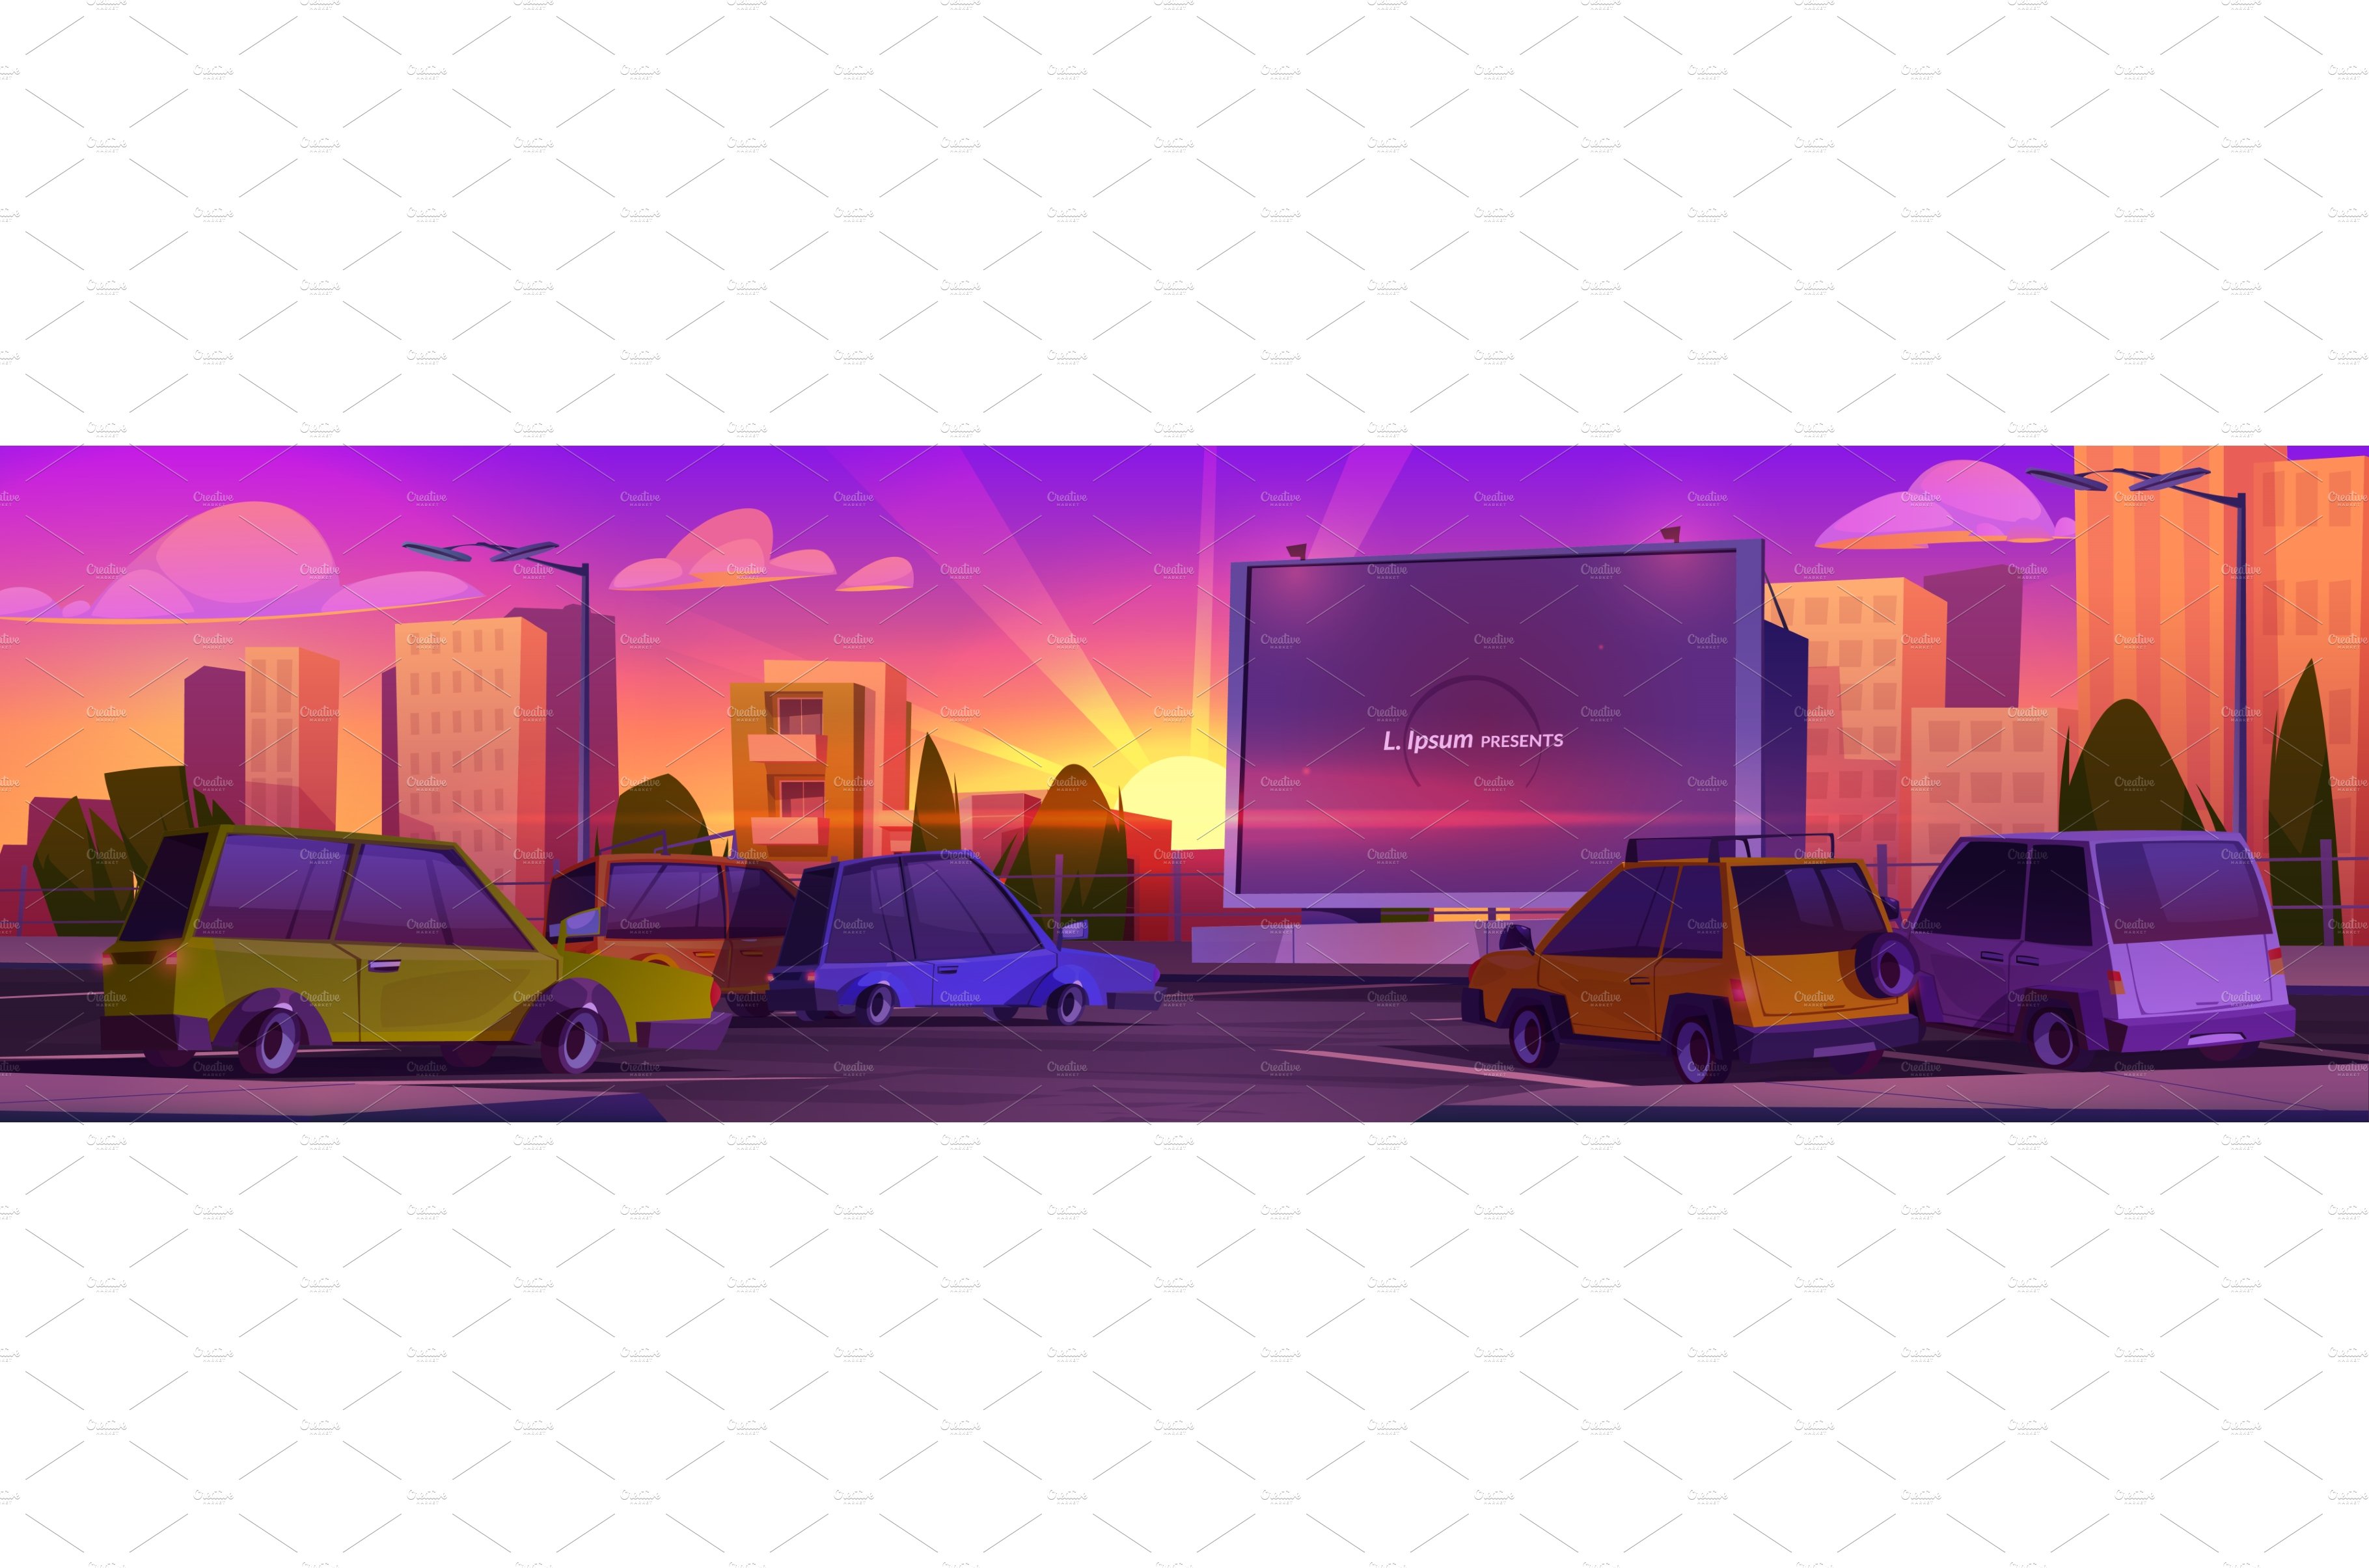 Drive-in cinema with car on sunset cover image.